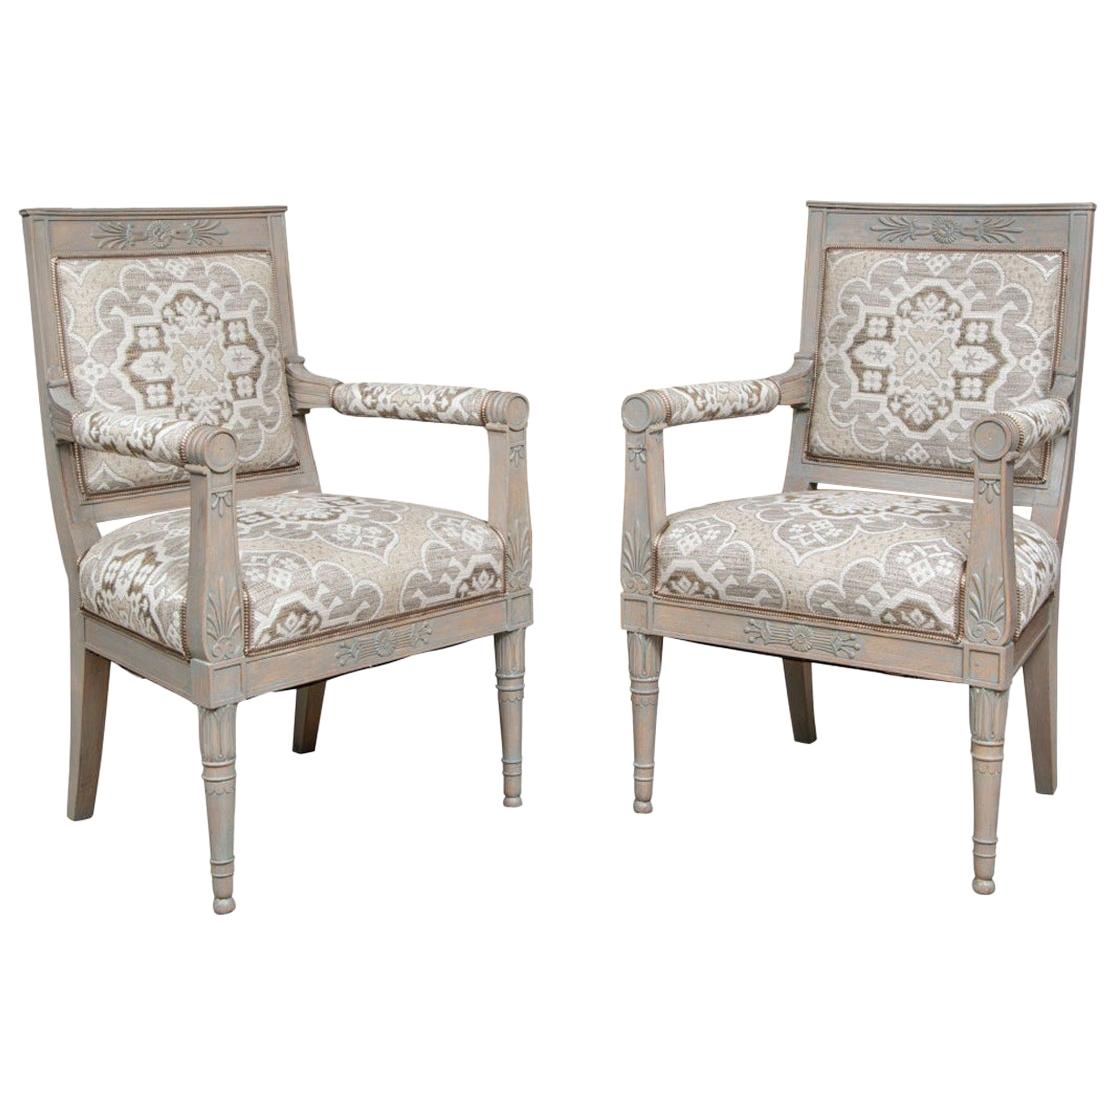 Pair of Fine Neoclassical Style Paint Decorated Arm Chairs